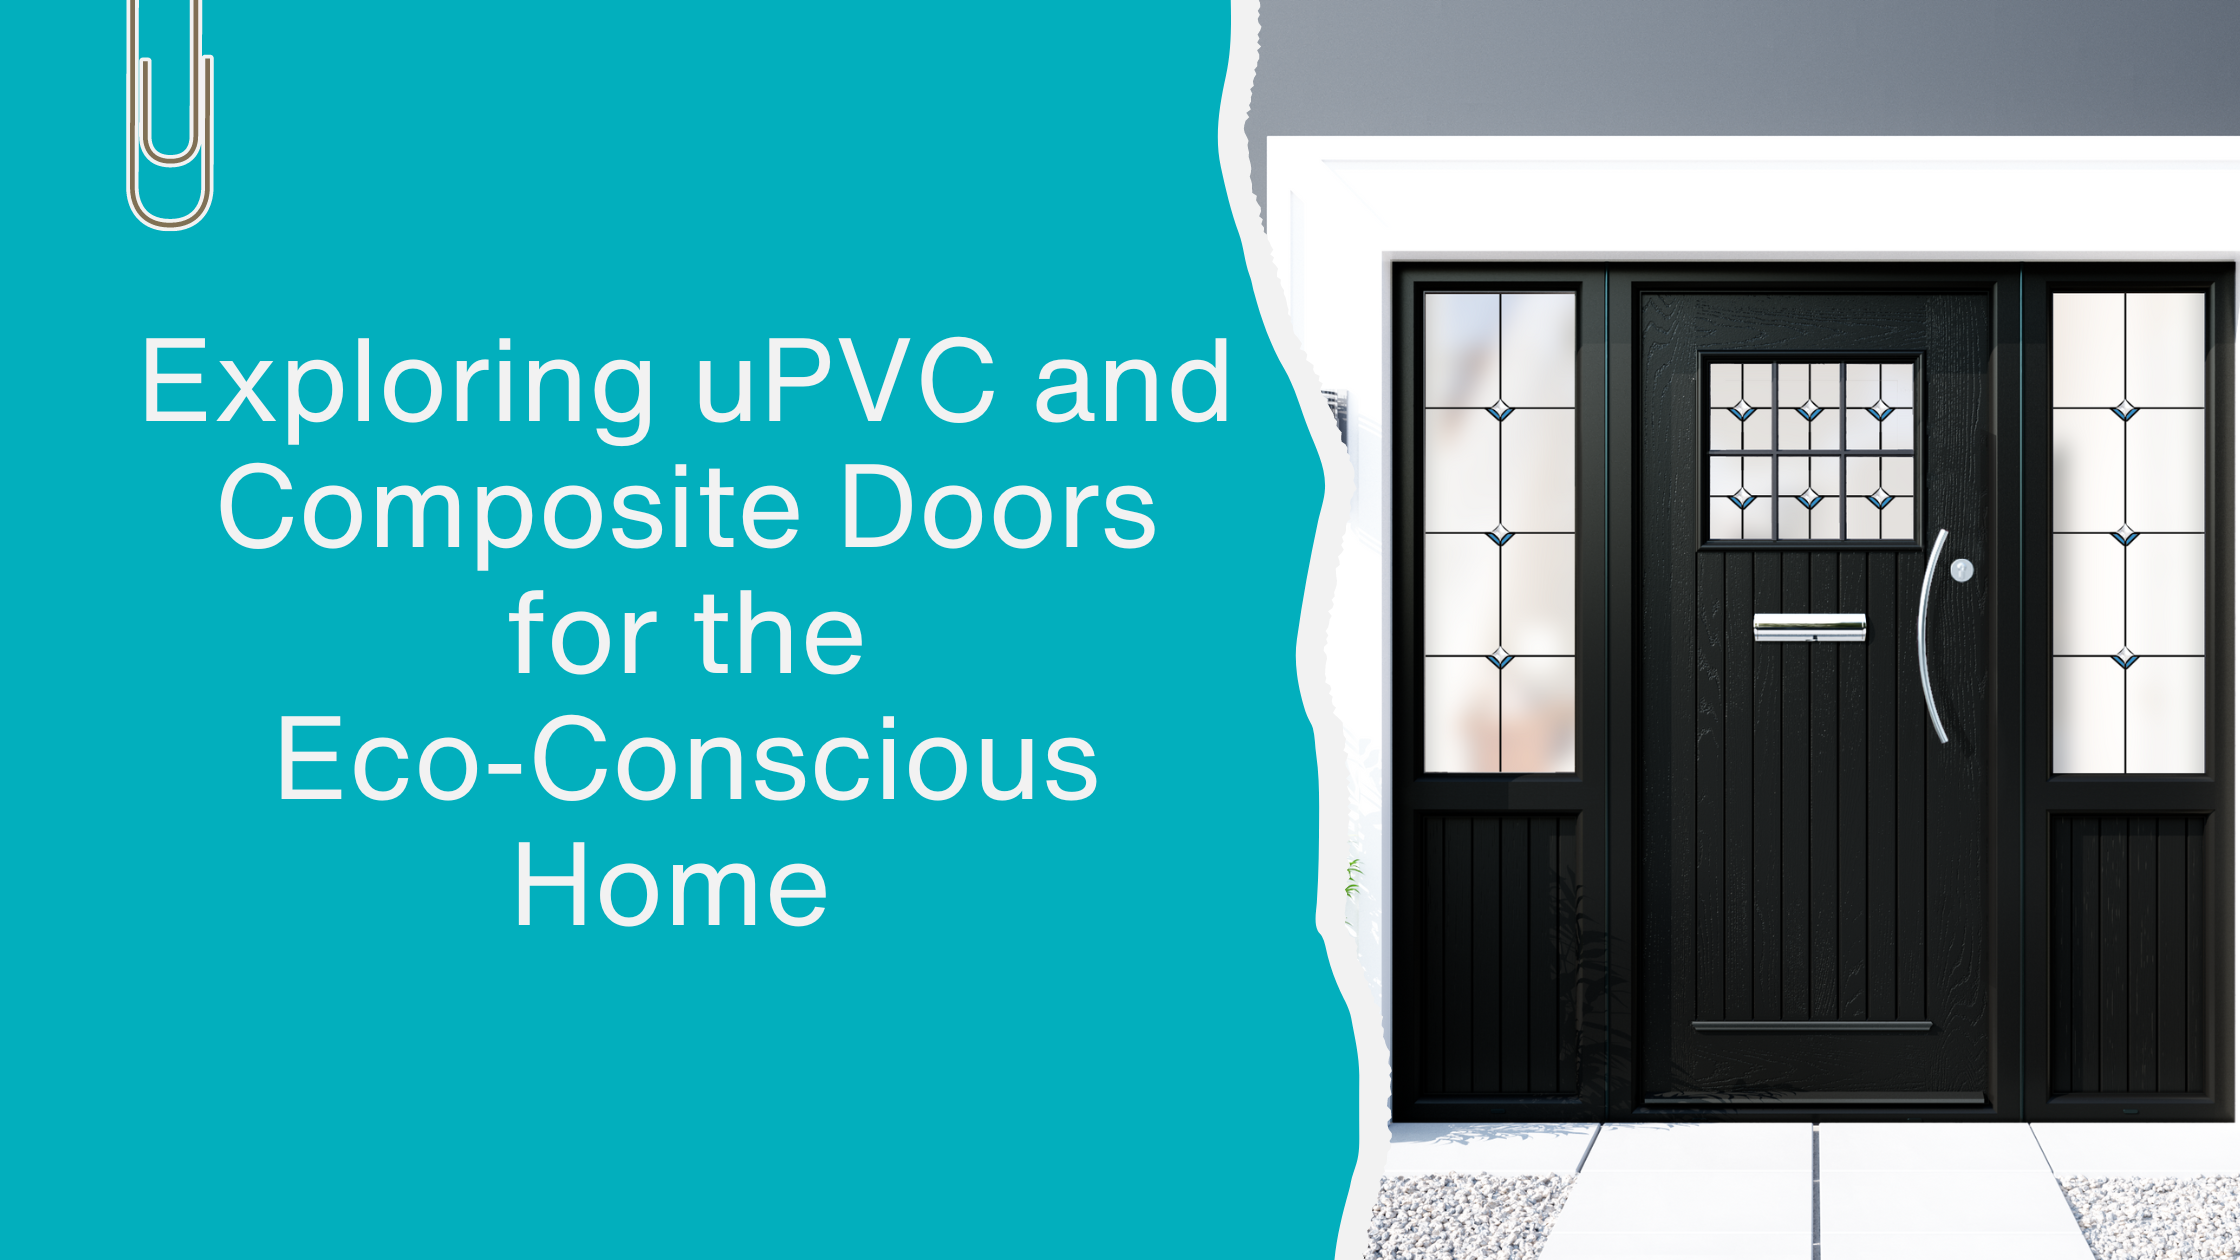 Choosing the Green Gateway: Exploring uPVC and Composite Doors for the Eco-Conscious Home